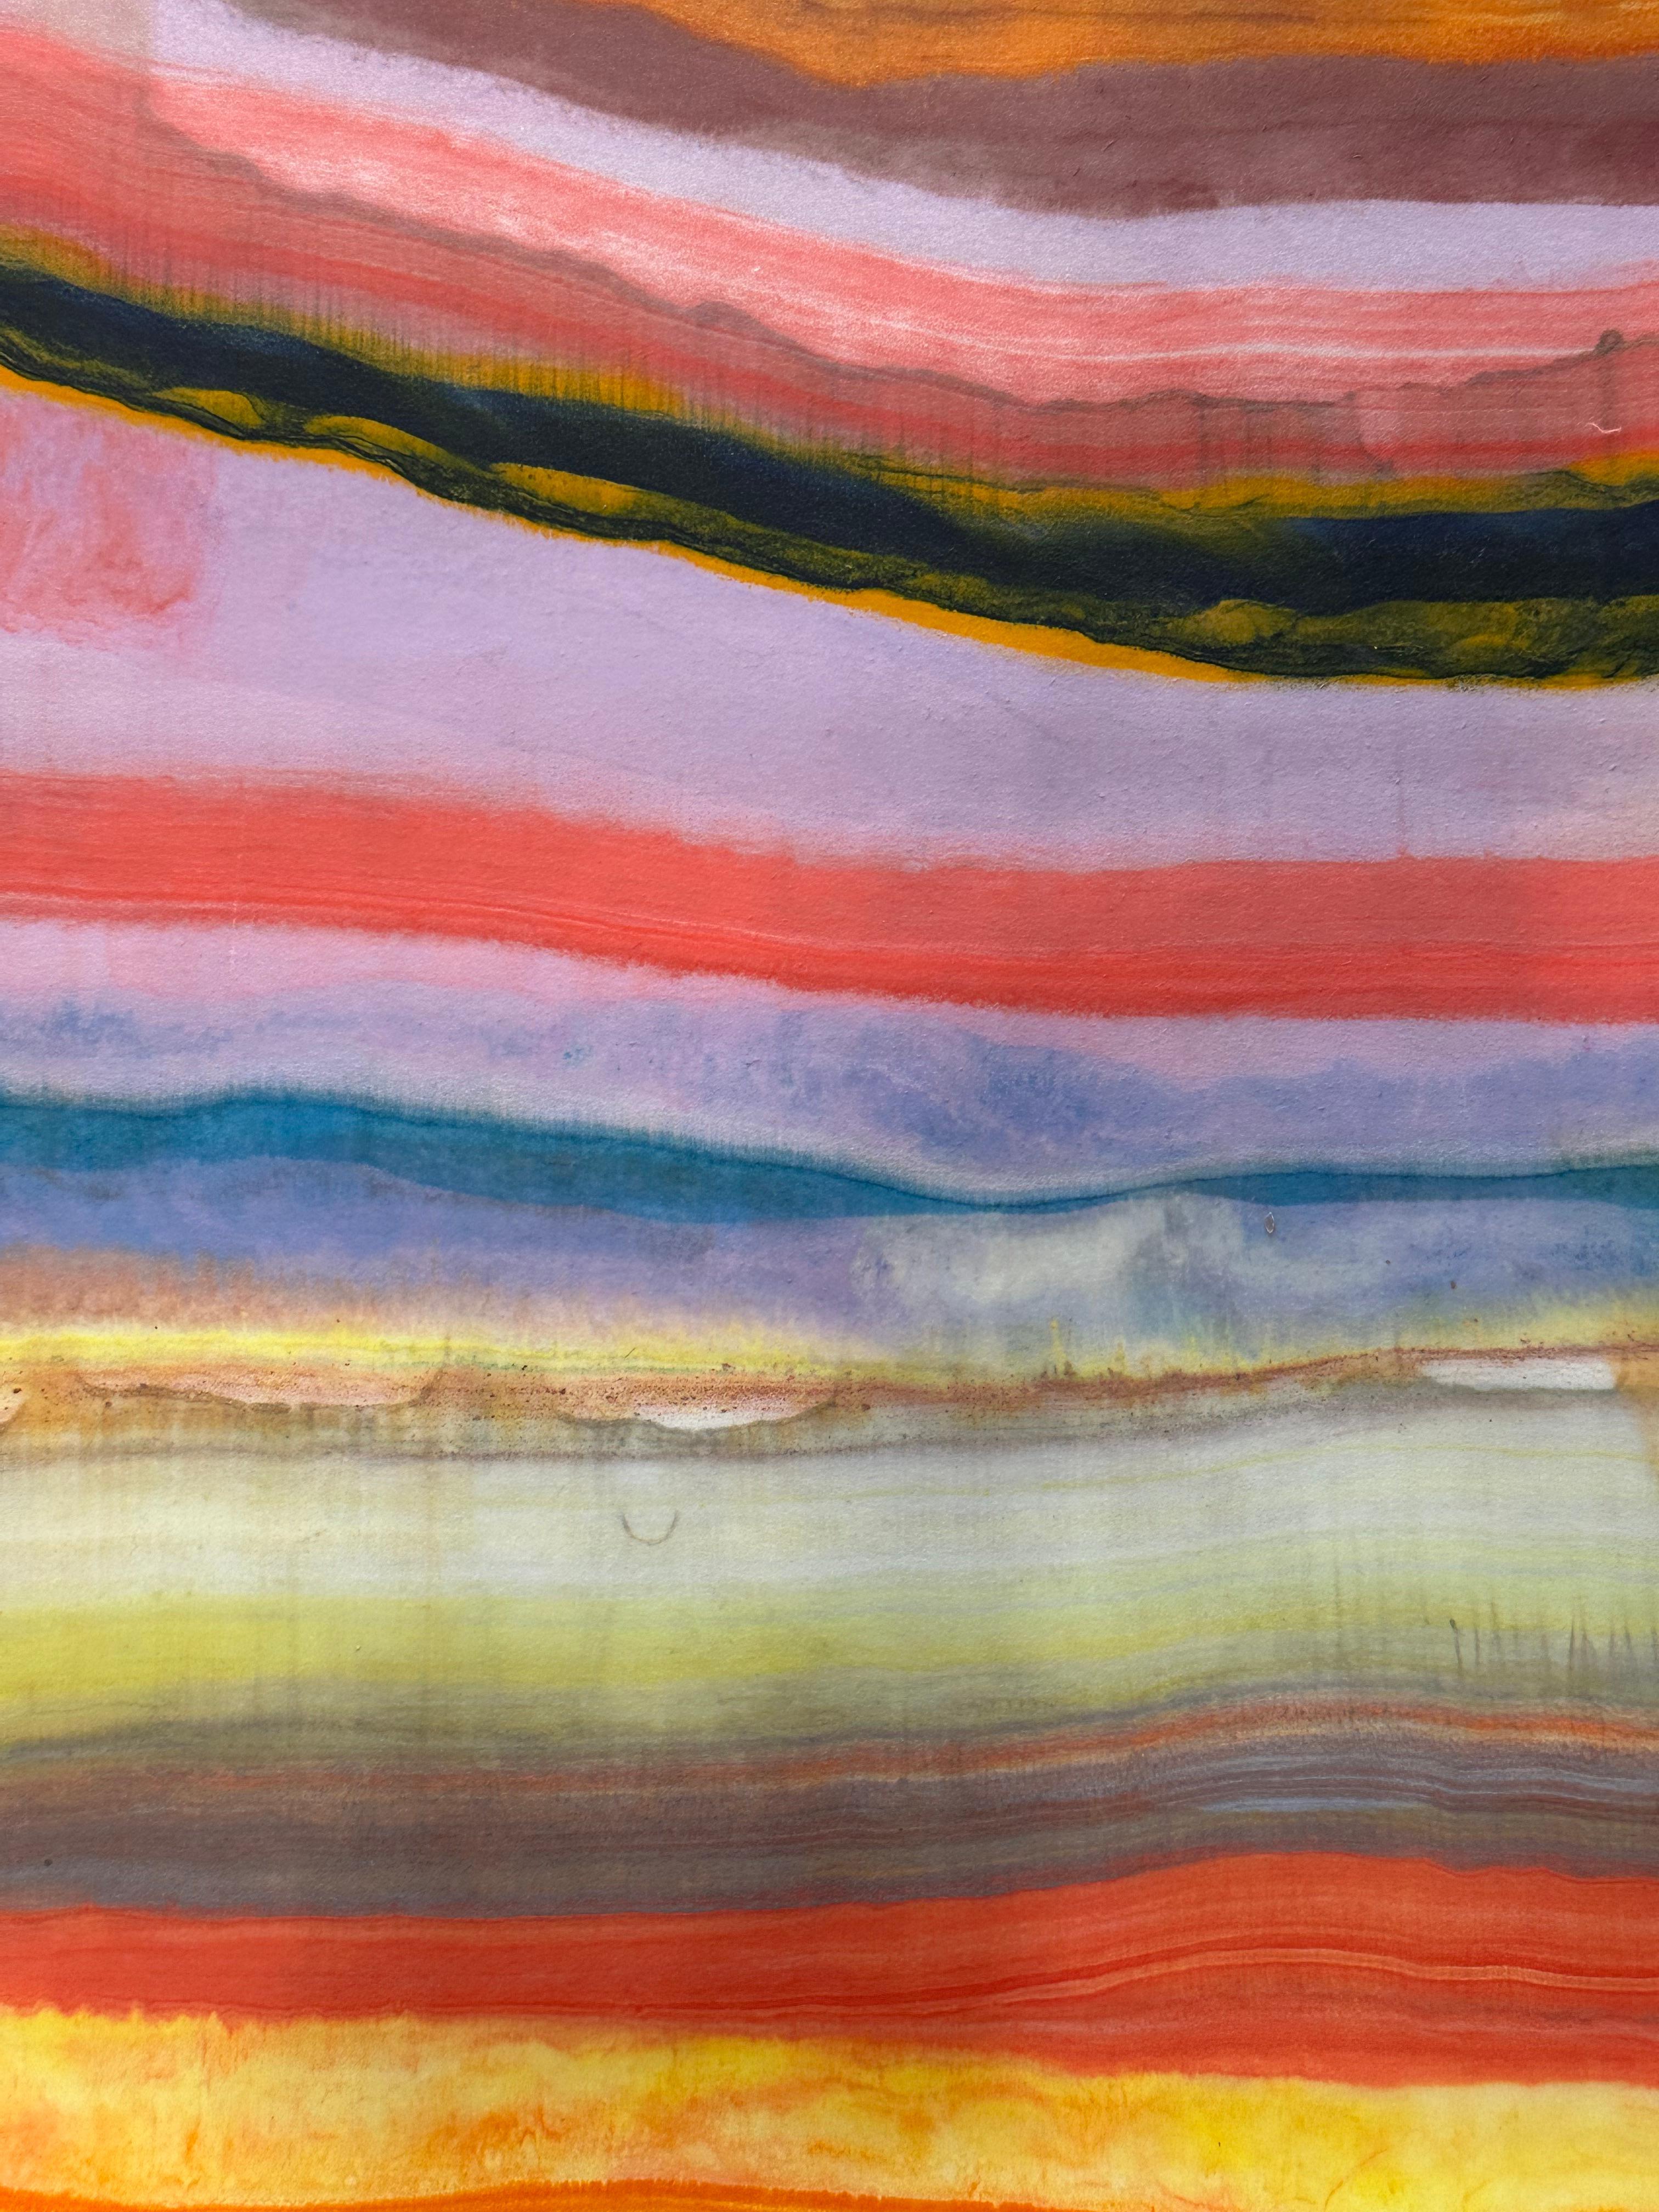 Laura Moriarty's Talking to Rocks 32 is a multicolored encaustic monotype on kozo paper. Layers of pigmented beeswax on lightweight paper create an undulating composition suggesting layers of the earth's crust and geological formations depicted in